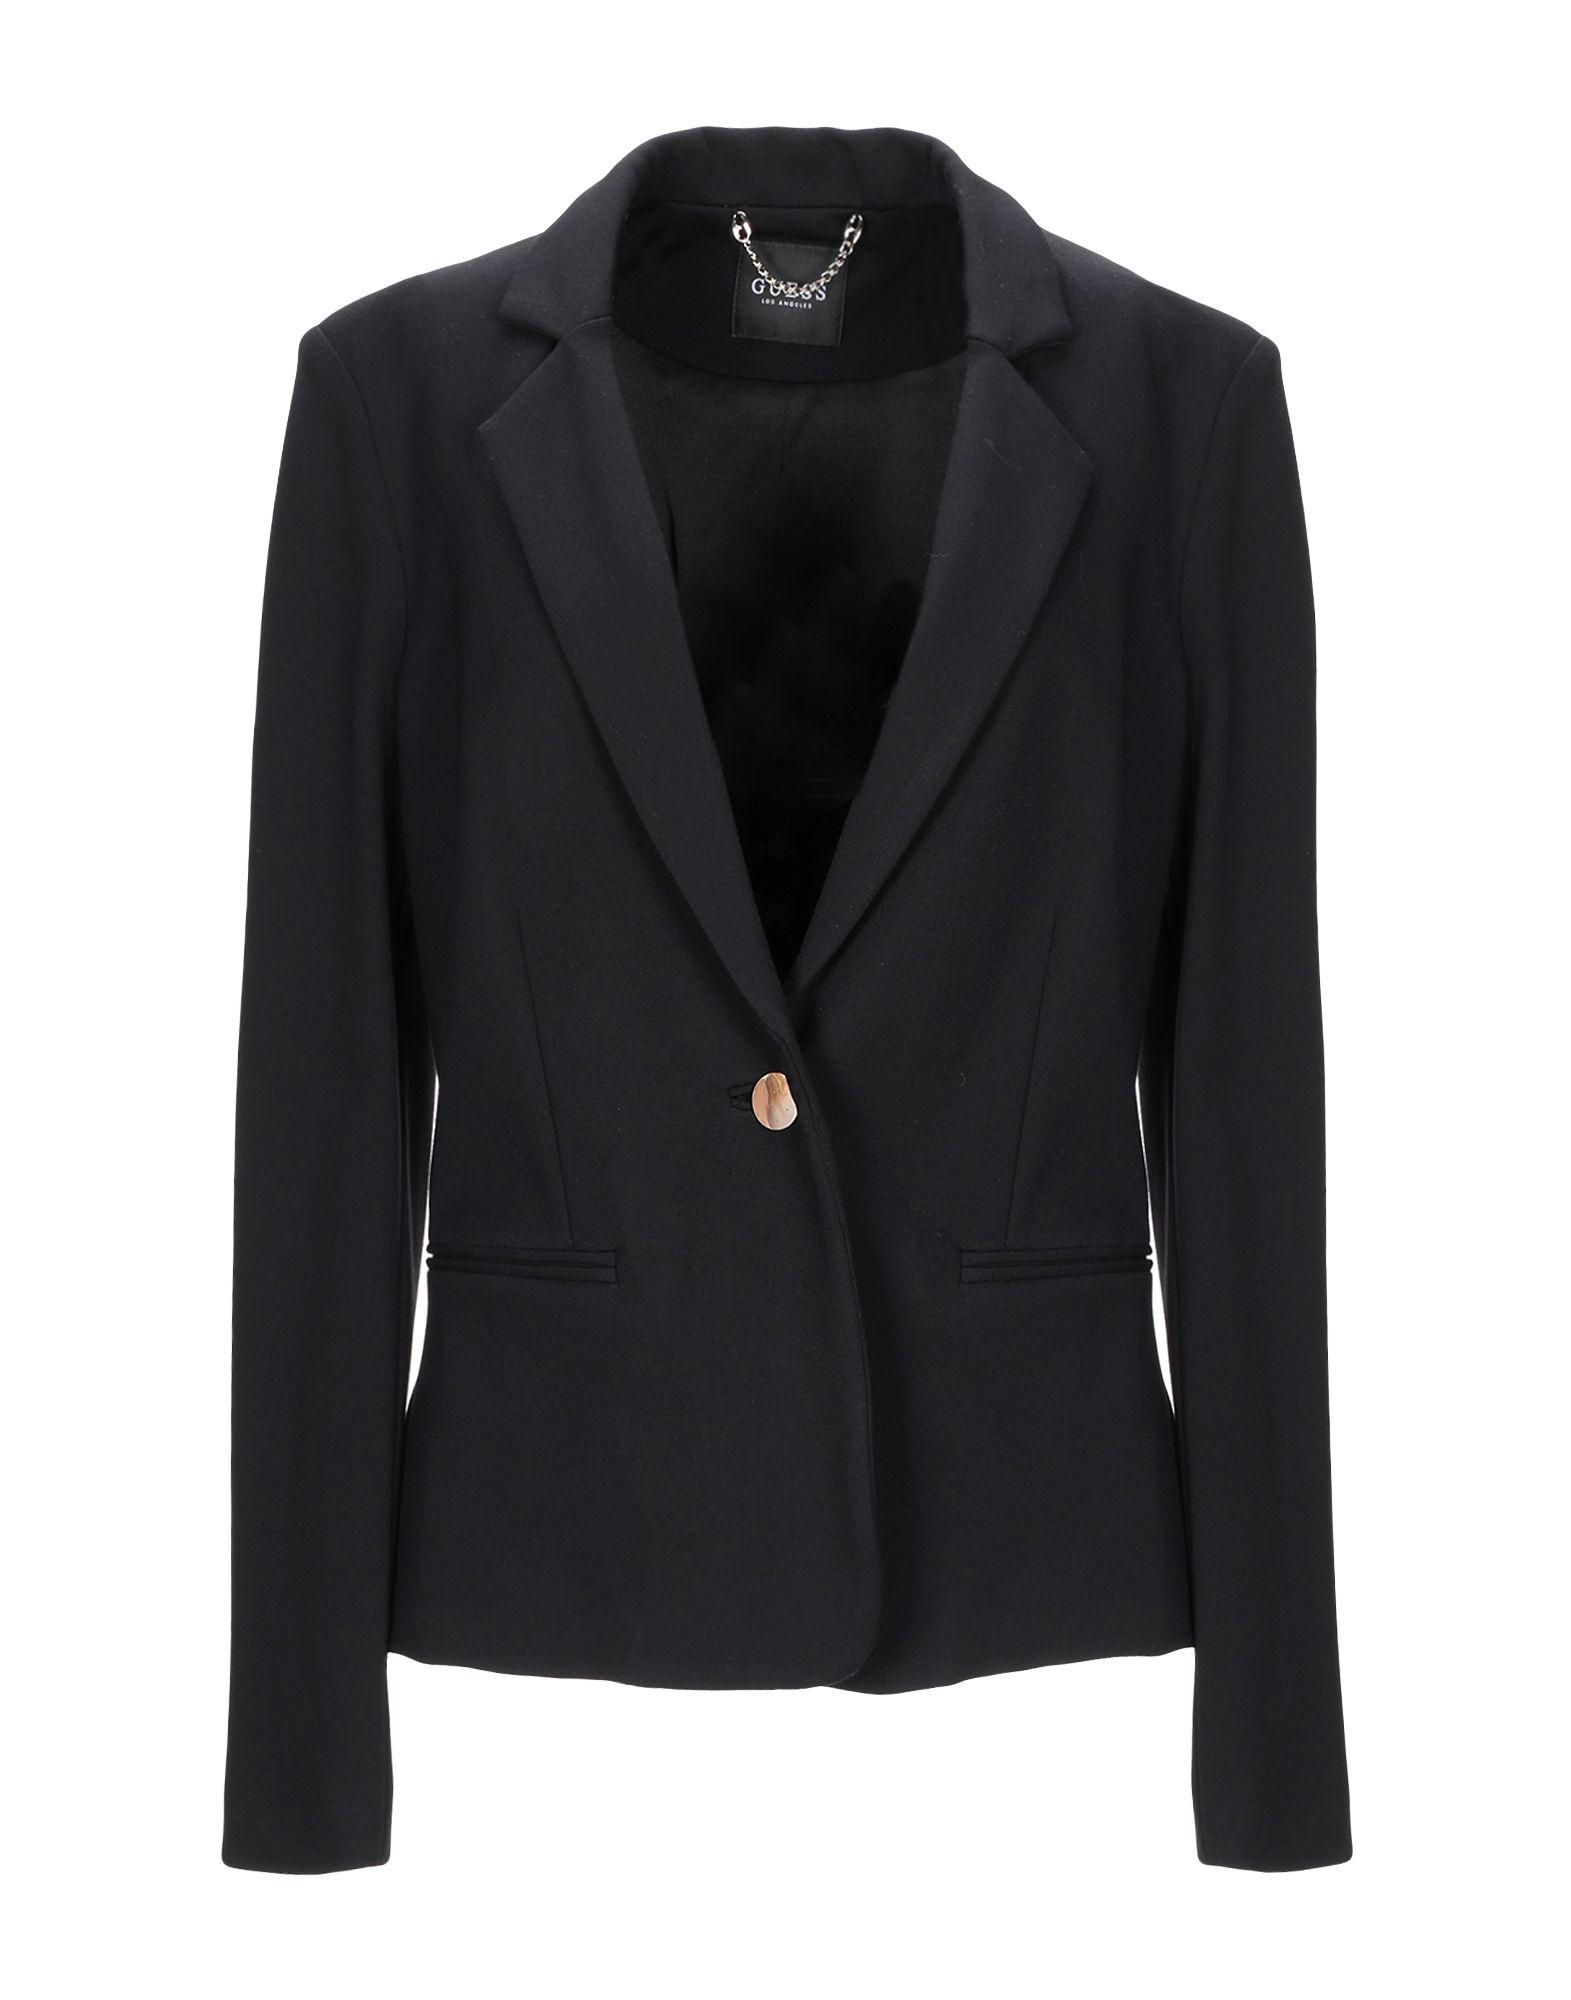 Guess Synthetic Blazer in Black - Lyst